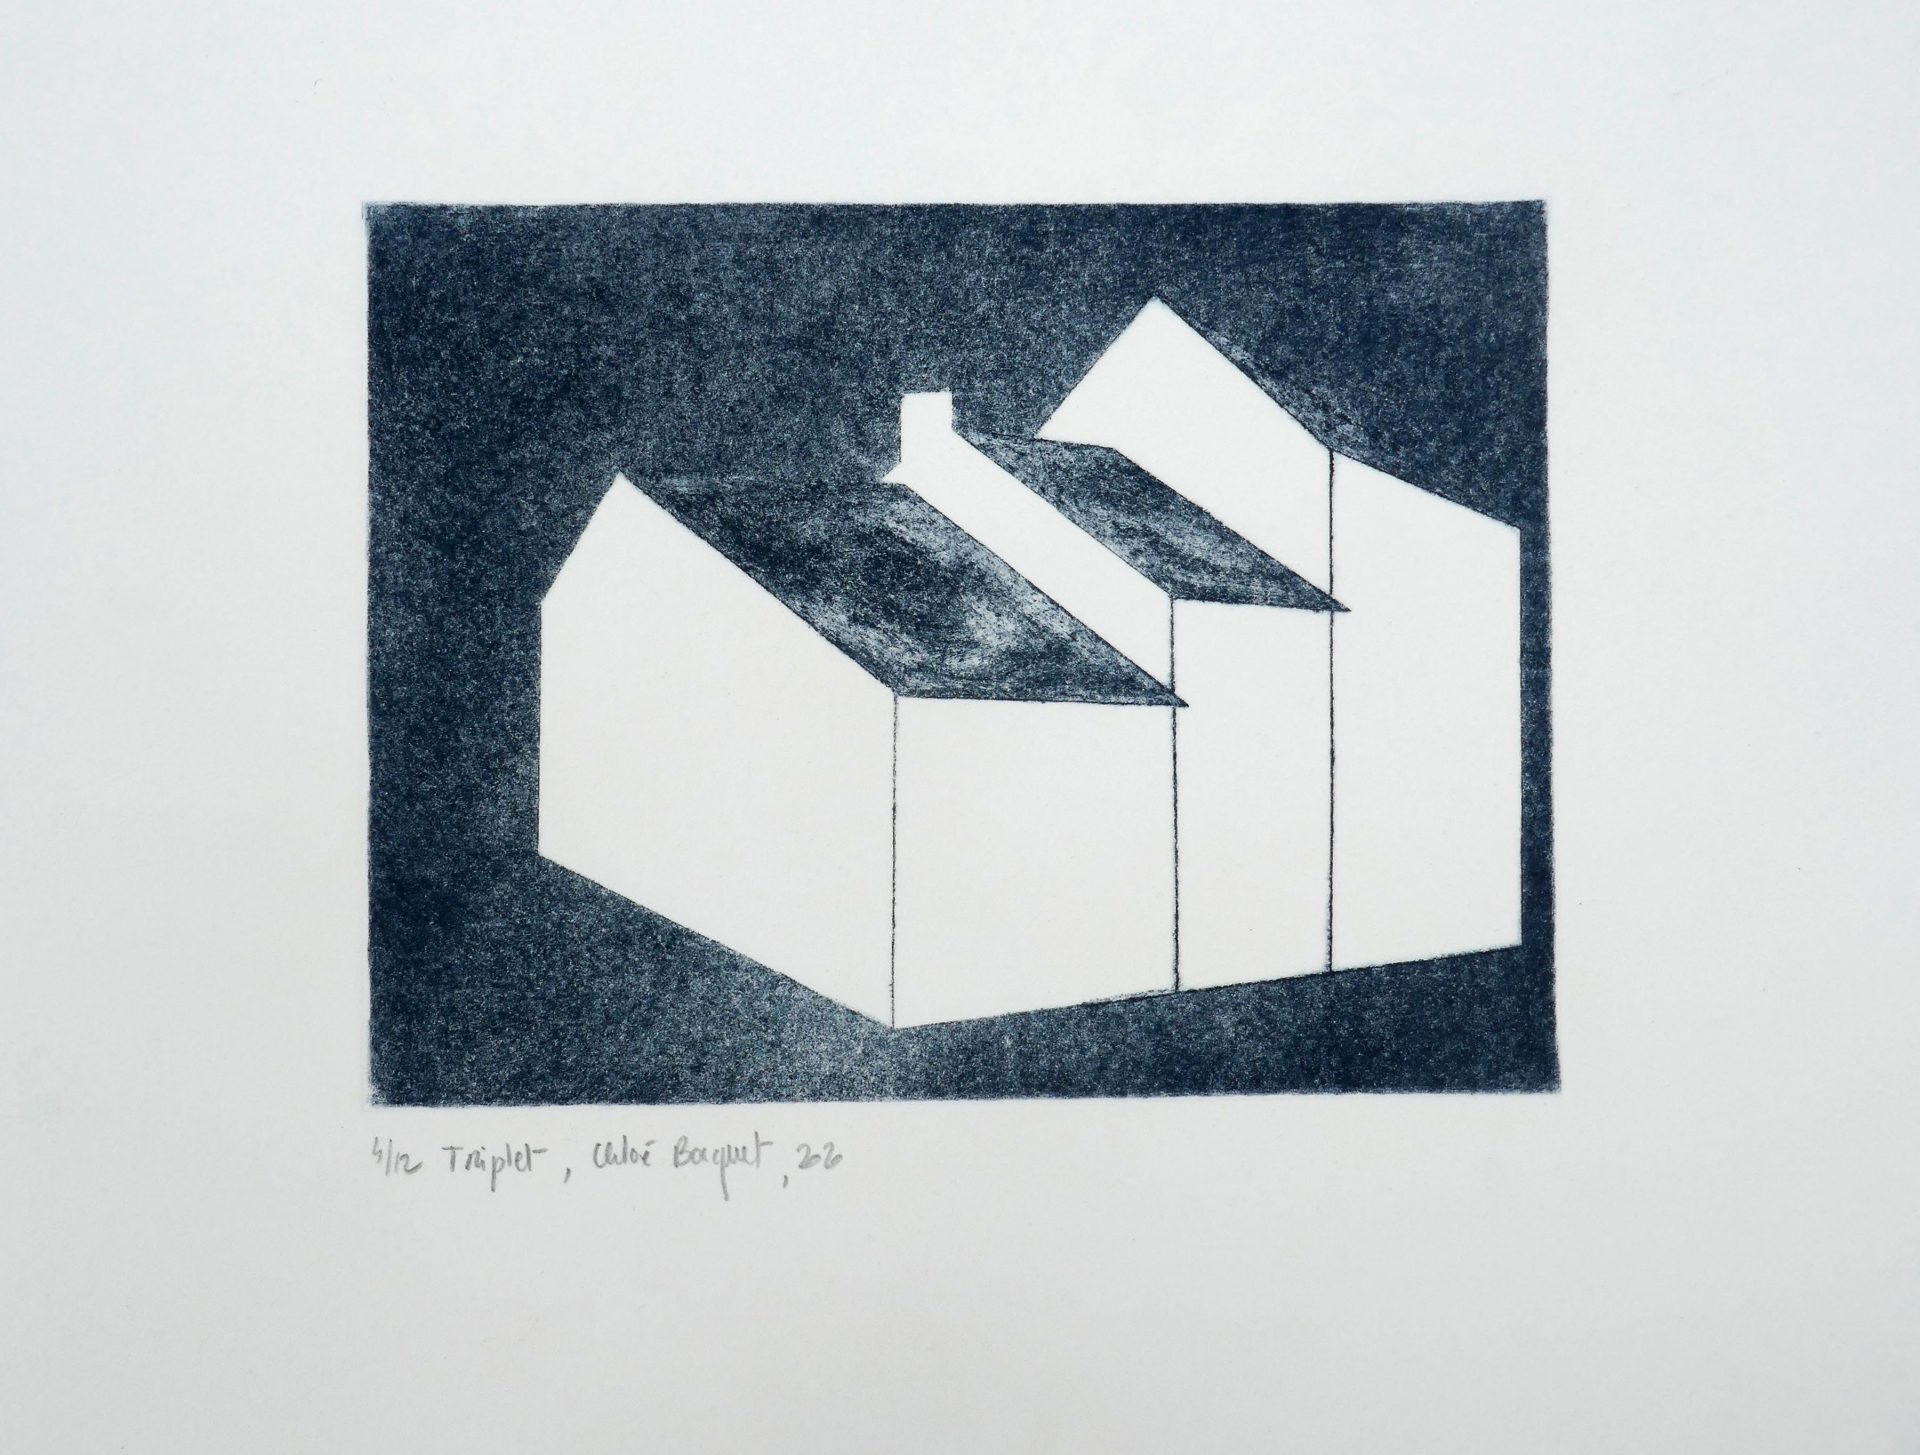 Triplet, 2020, drypoint, image size 15x19,5 cm, paper size 25x33 cm, edition of 12